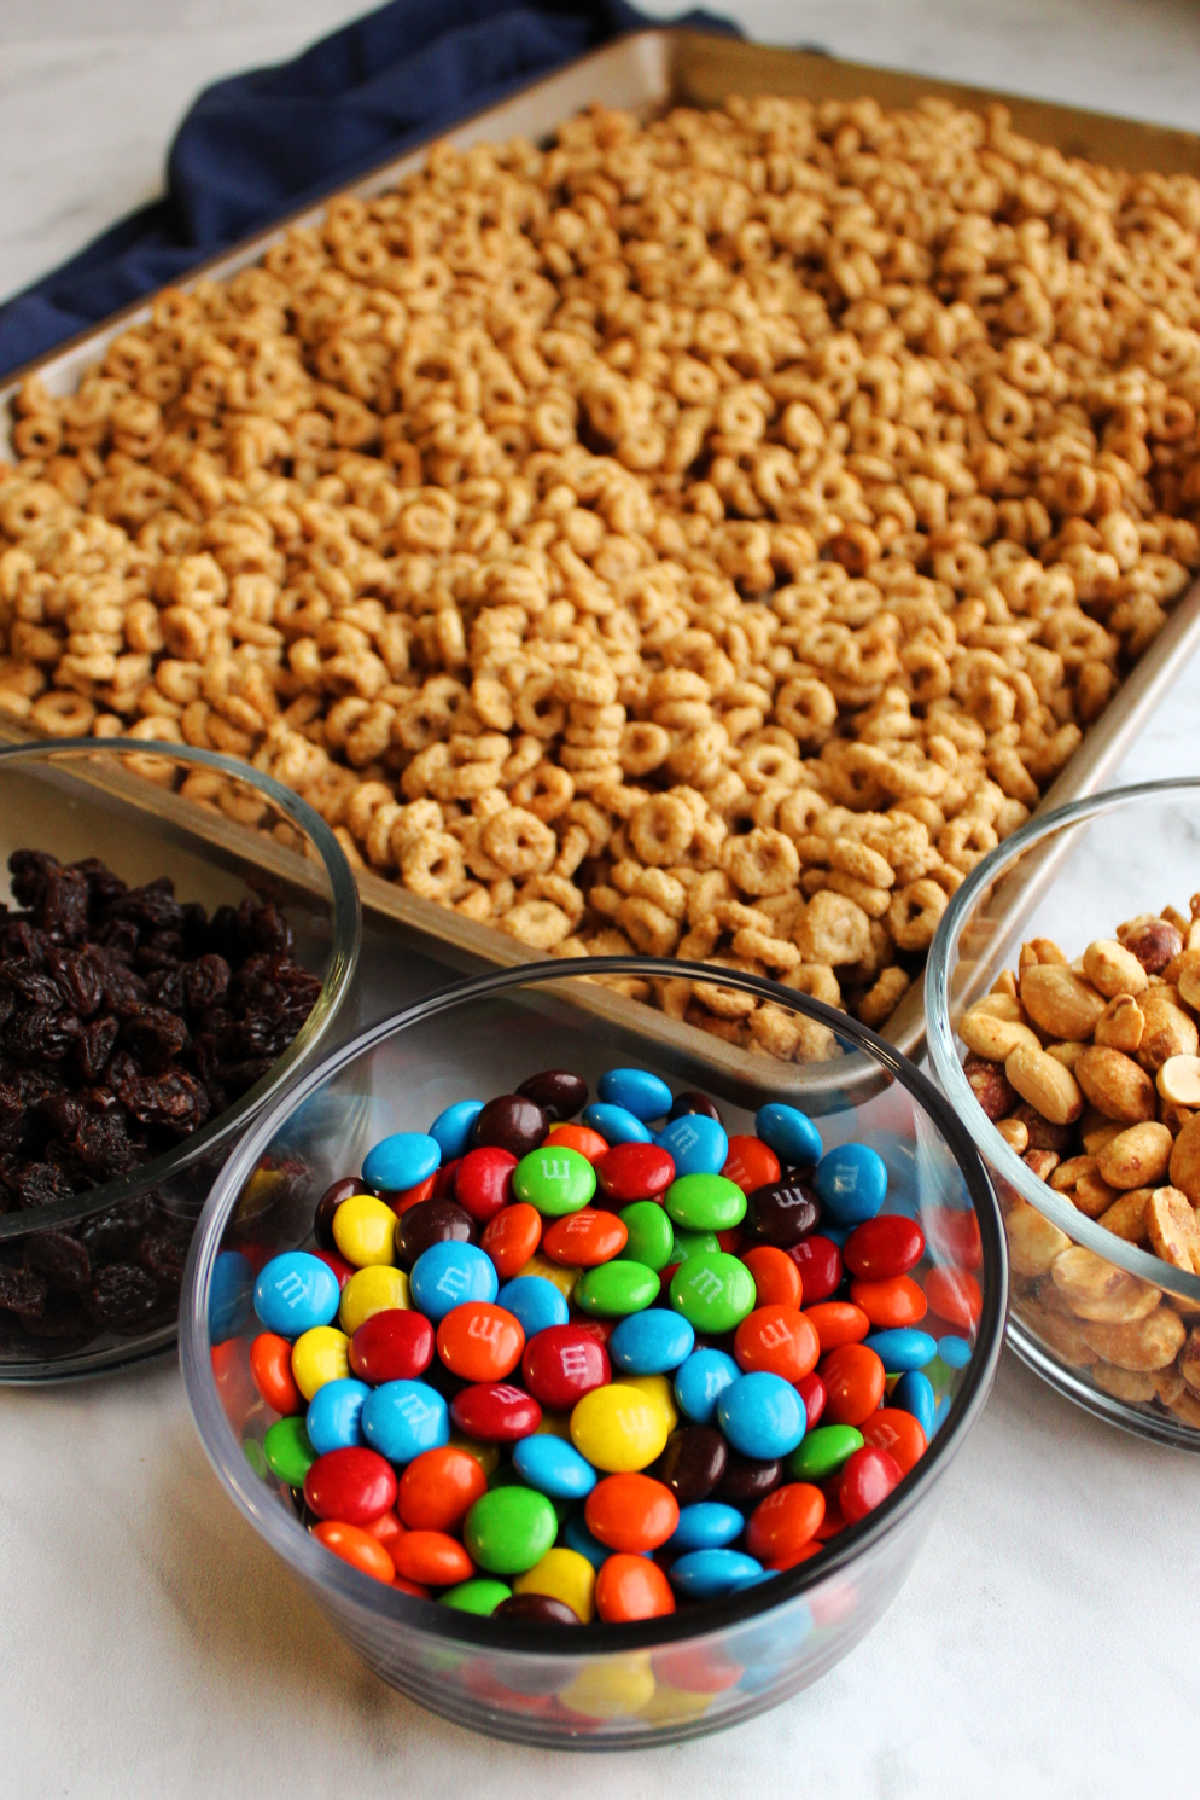 Sheet pan filled with maple peanut butter coated cheerios next to bowls of M&Ms, raisins and peanuts.